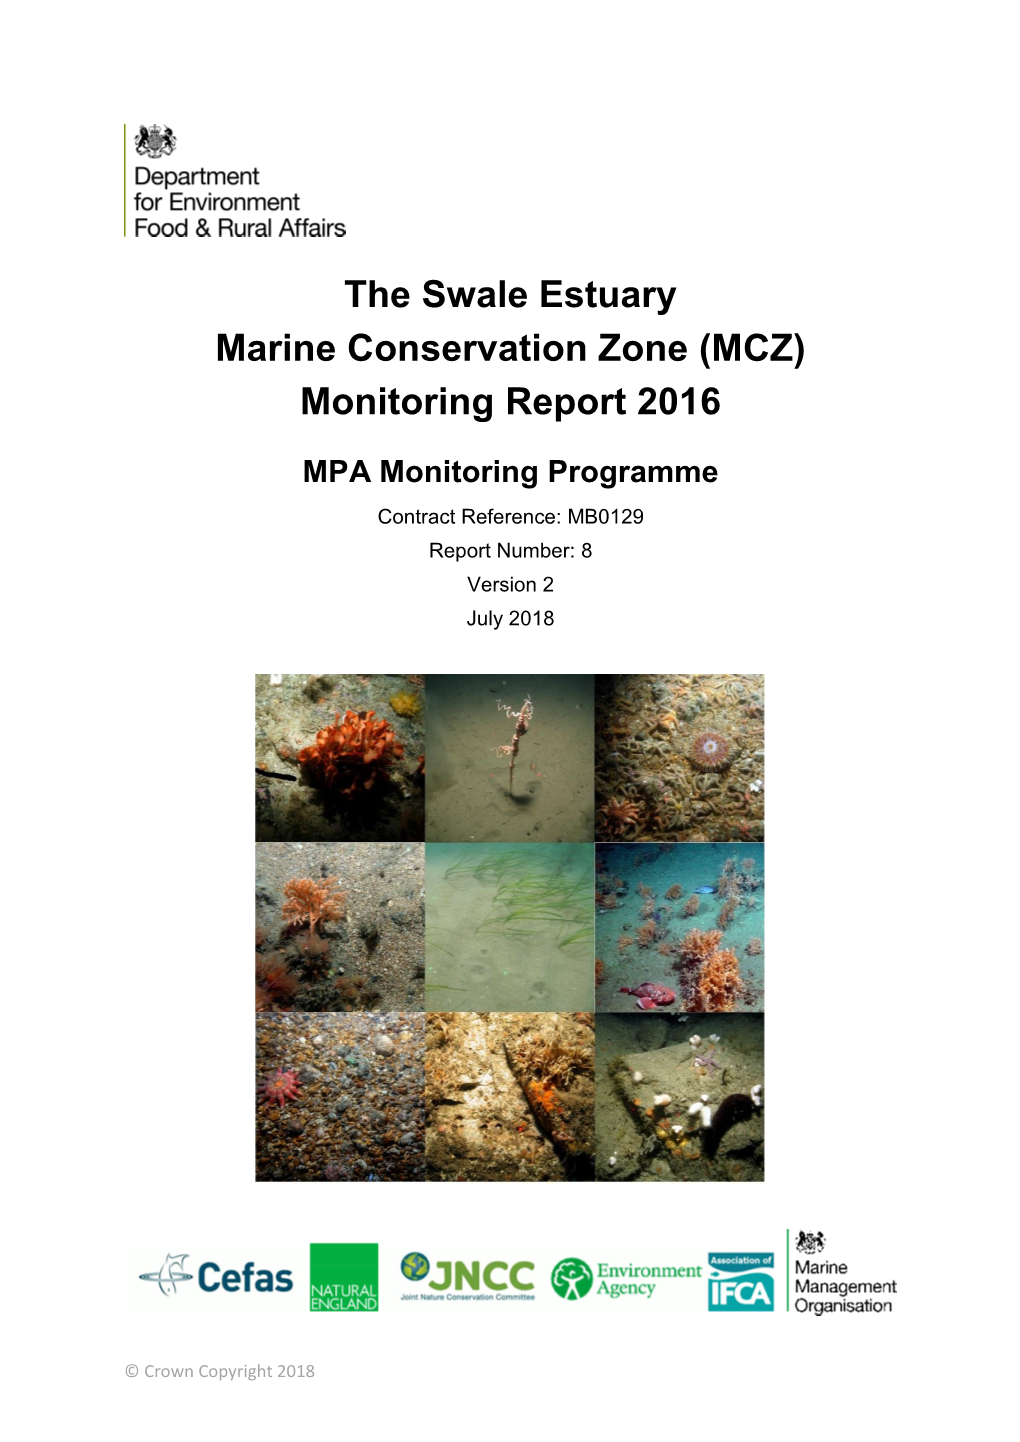 The Swale Estuary Marine Conservation Zone (MCZ) Monitoring Report 2016